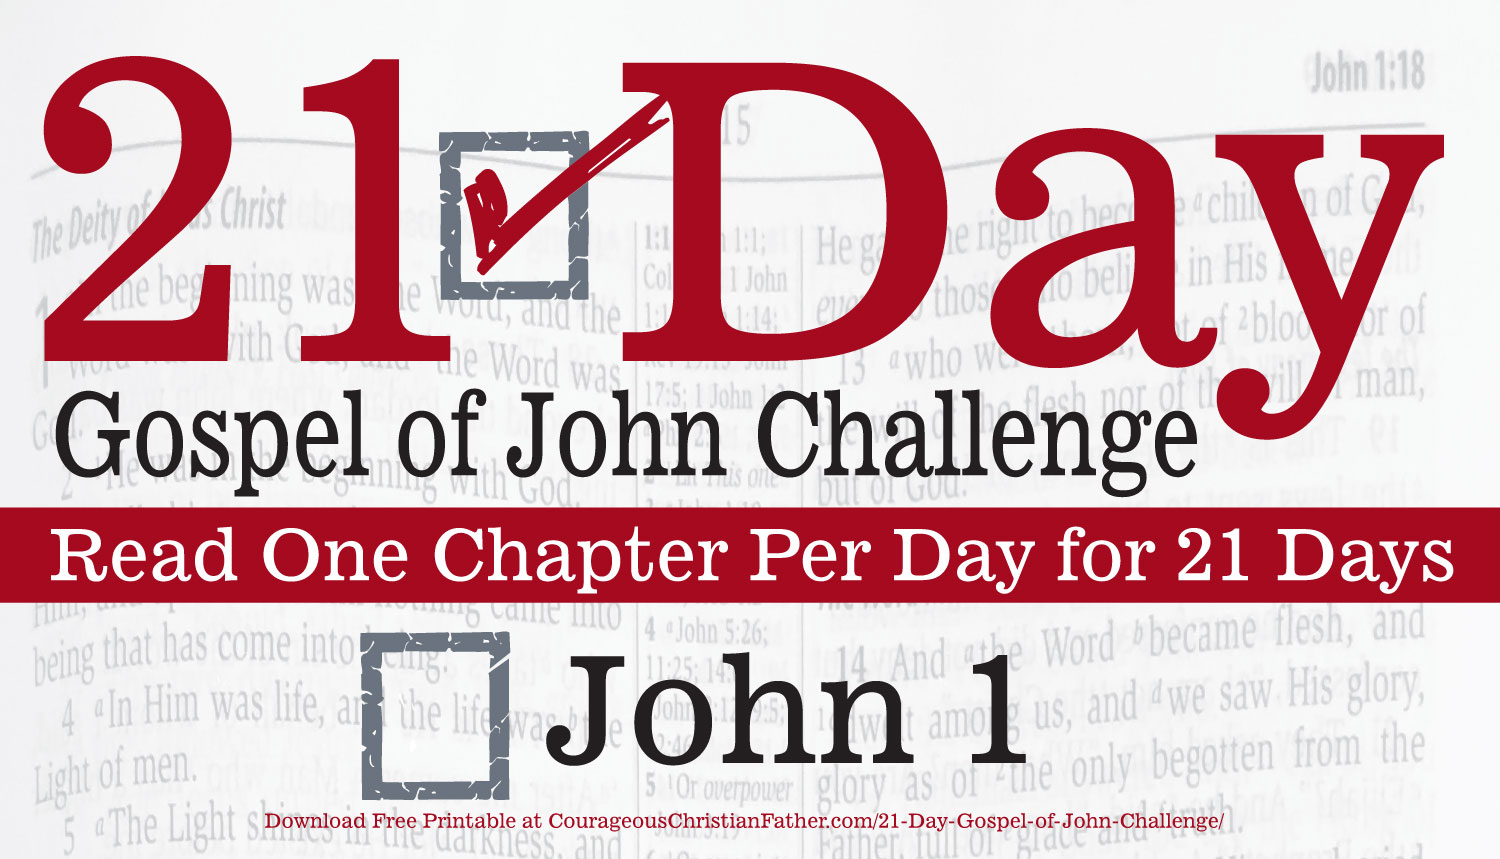 John 1. Today is day one of the 21 day Gospel of John challenge. Read chapter 1 of the Gospel of John. In this blog post I talk about that first chapter. #John1